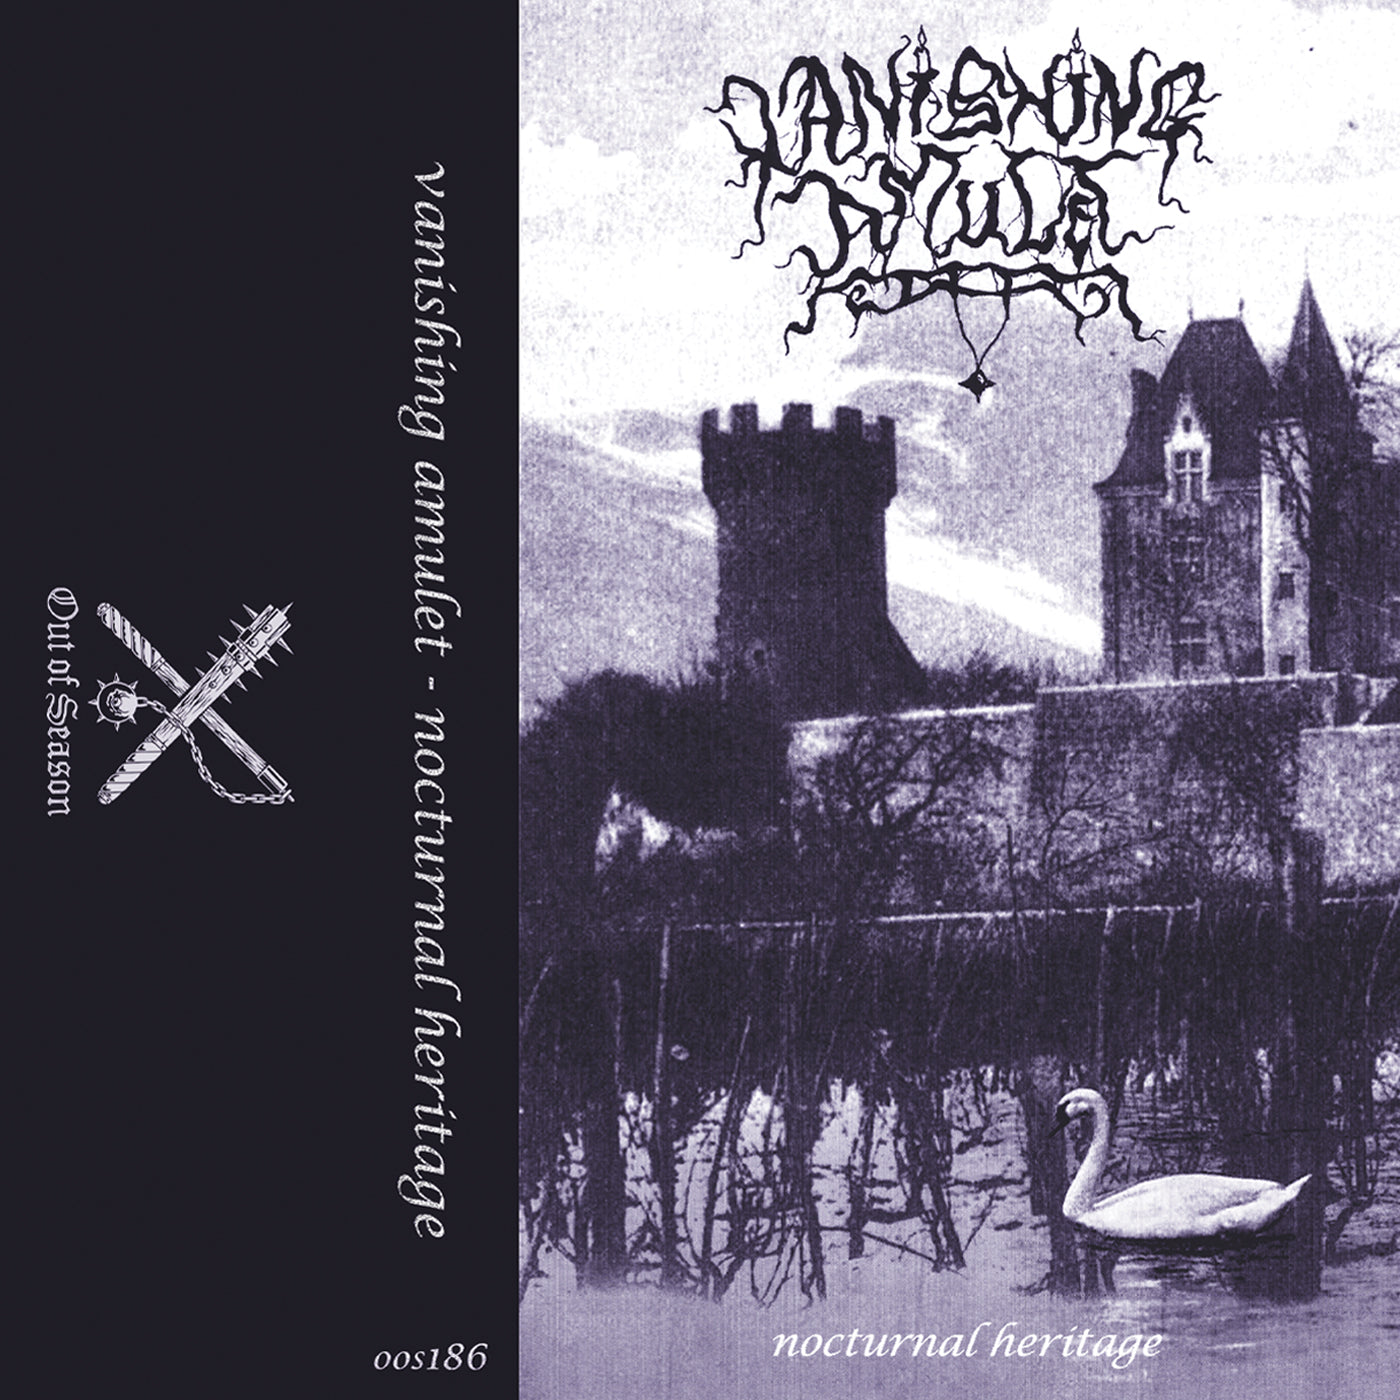 [SOLD OUT] VANISHING AMULET "Nocturnal Heritage" Cassette Tape (lim.200)